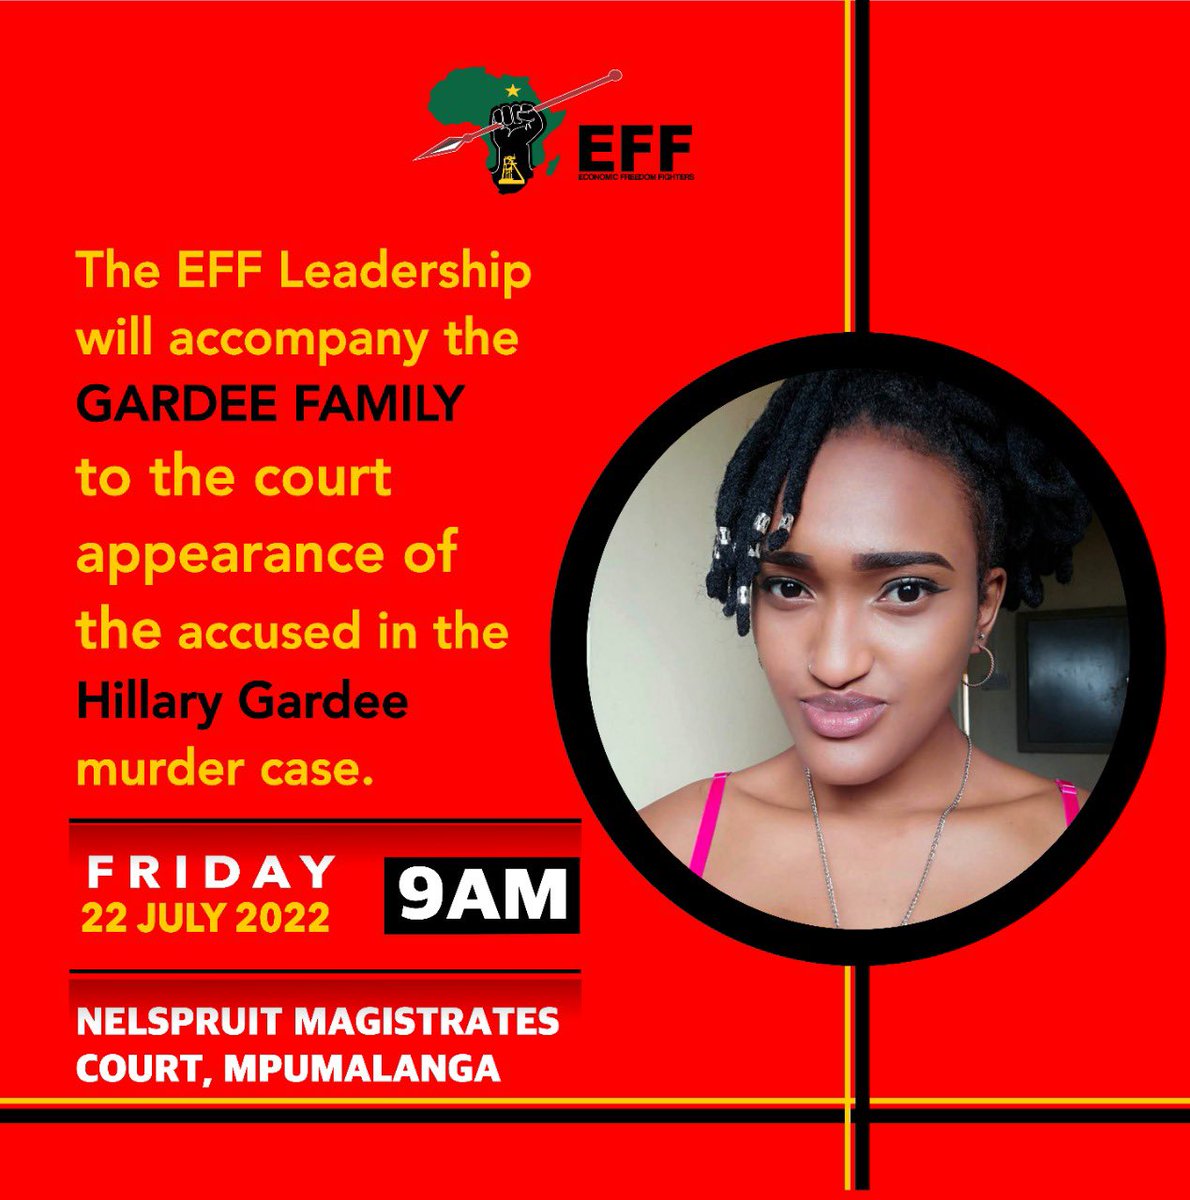 Eff will be accompanying the Gardee family to court, I wish as Zimbabwean we could also attend job sikhala's court cases for support